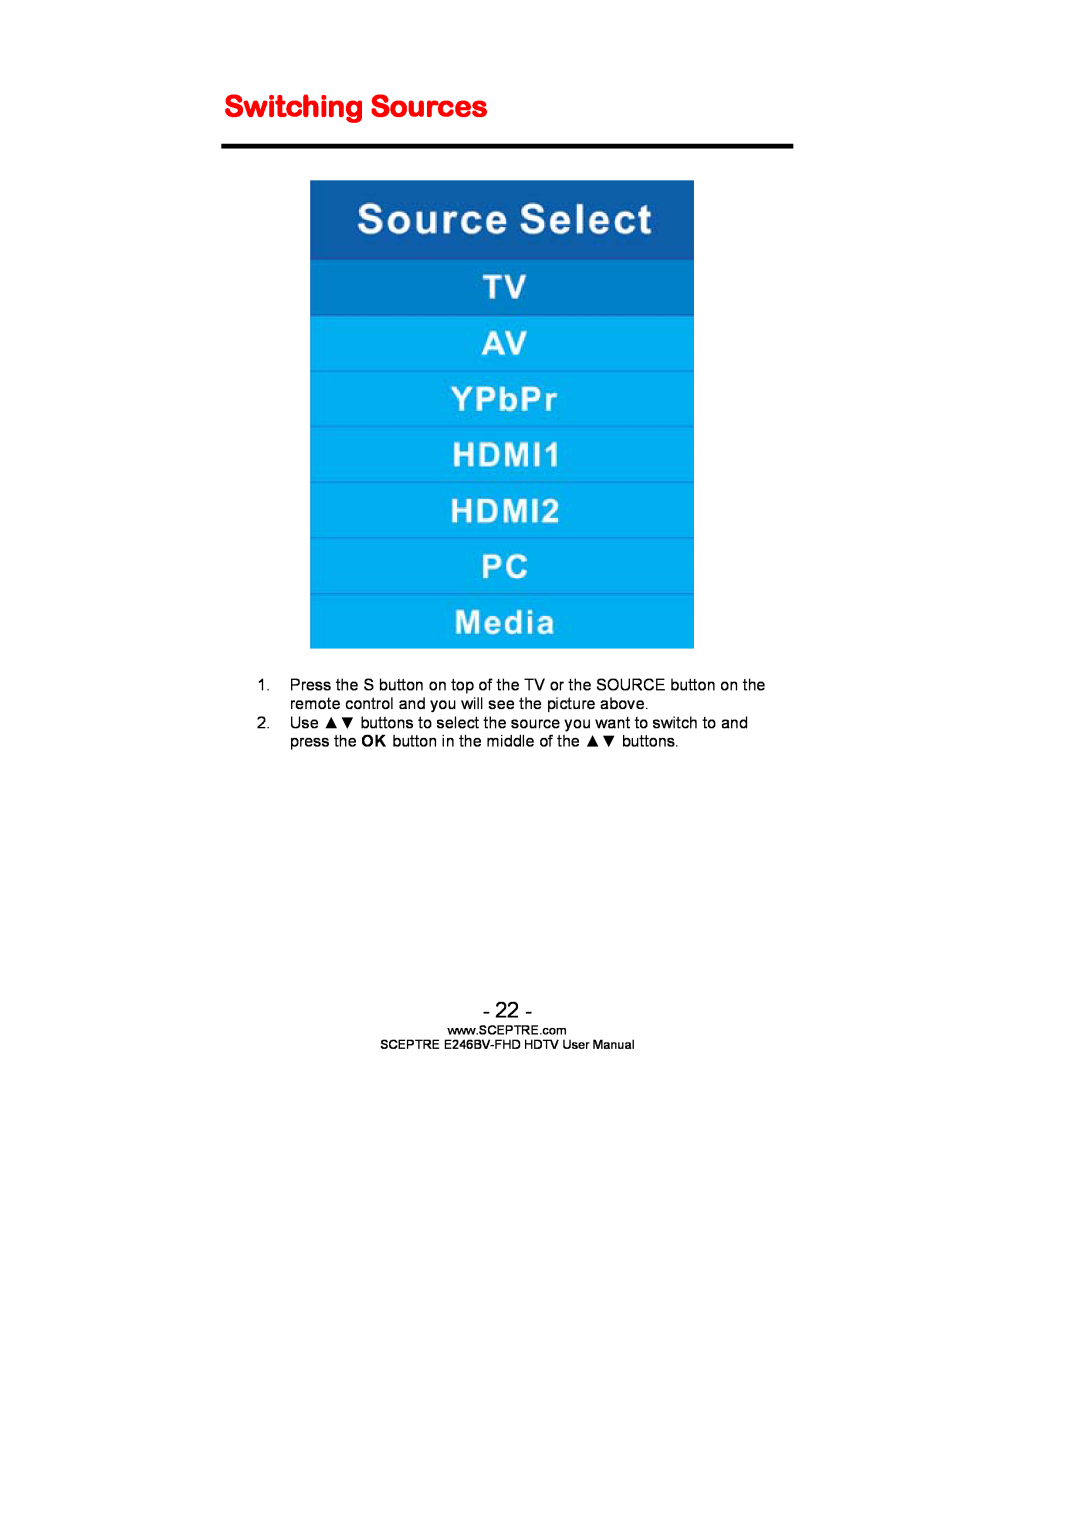 Sceptre Technologies LED HDTV, E246BV-FHD, E236BV-FHD user manual Switching Sources 